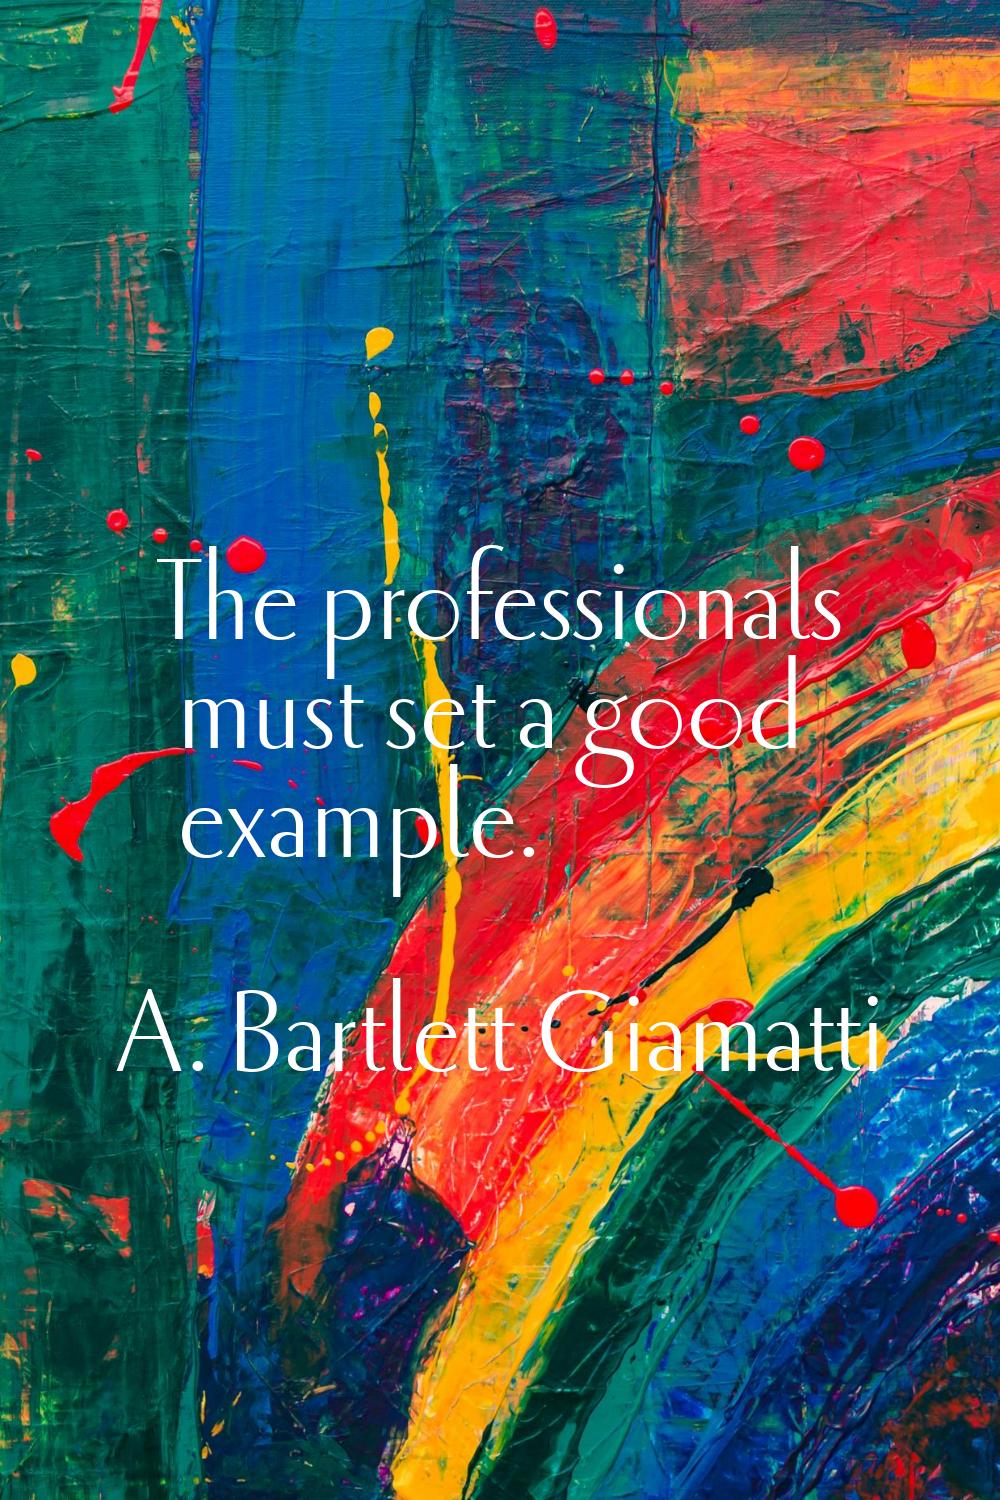 The professionals must set a good example.